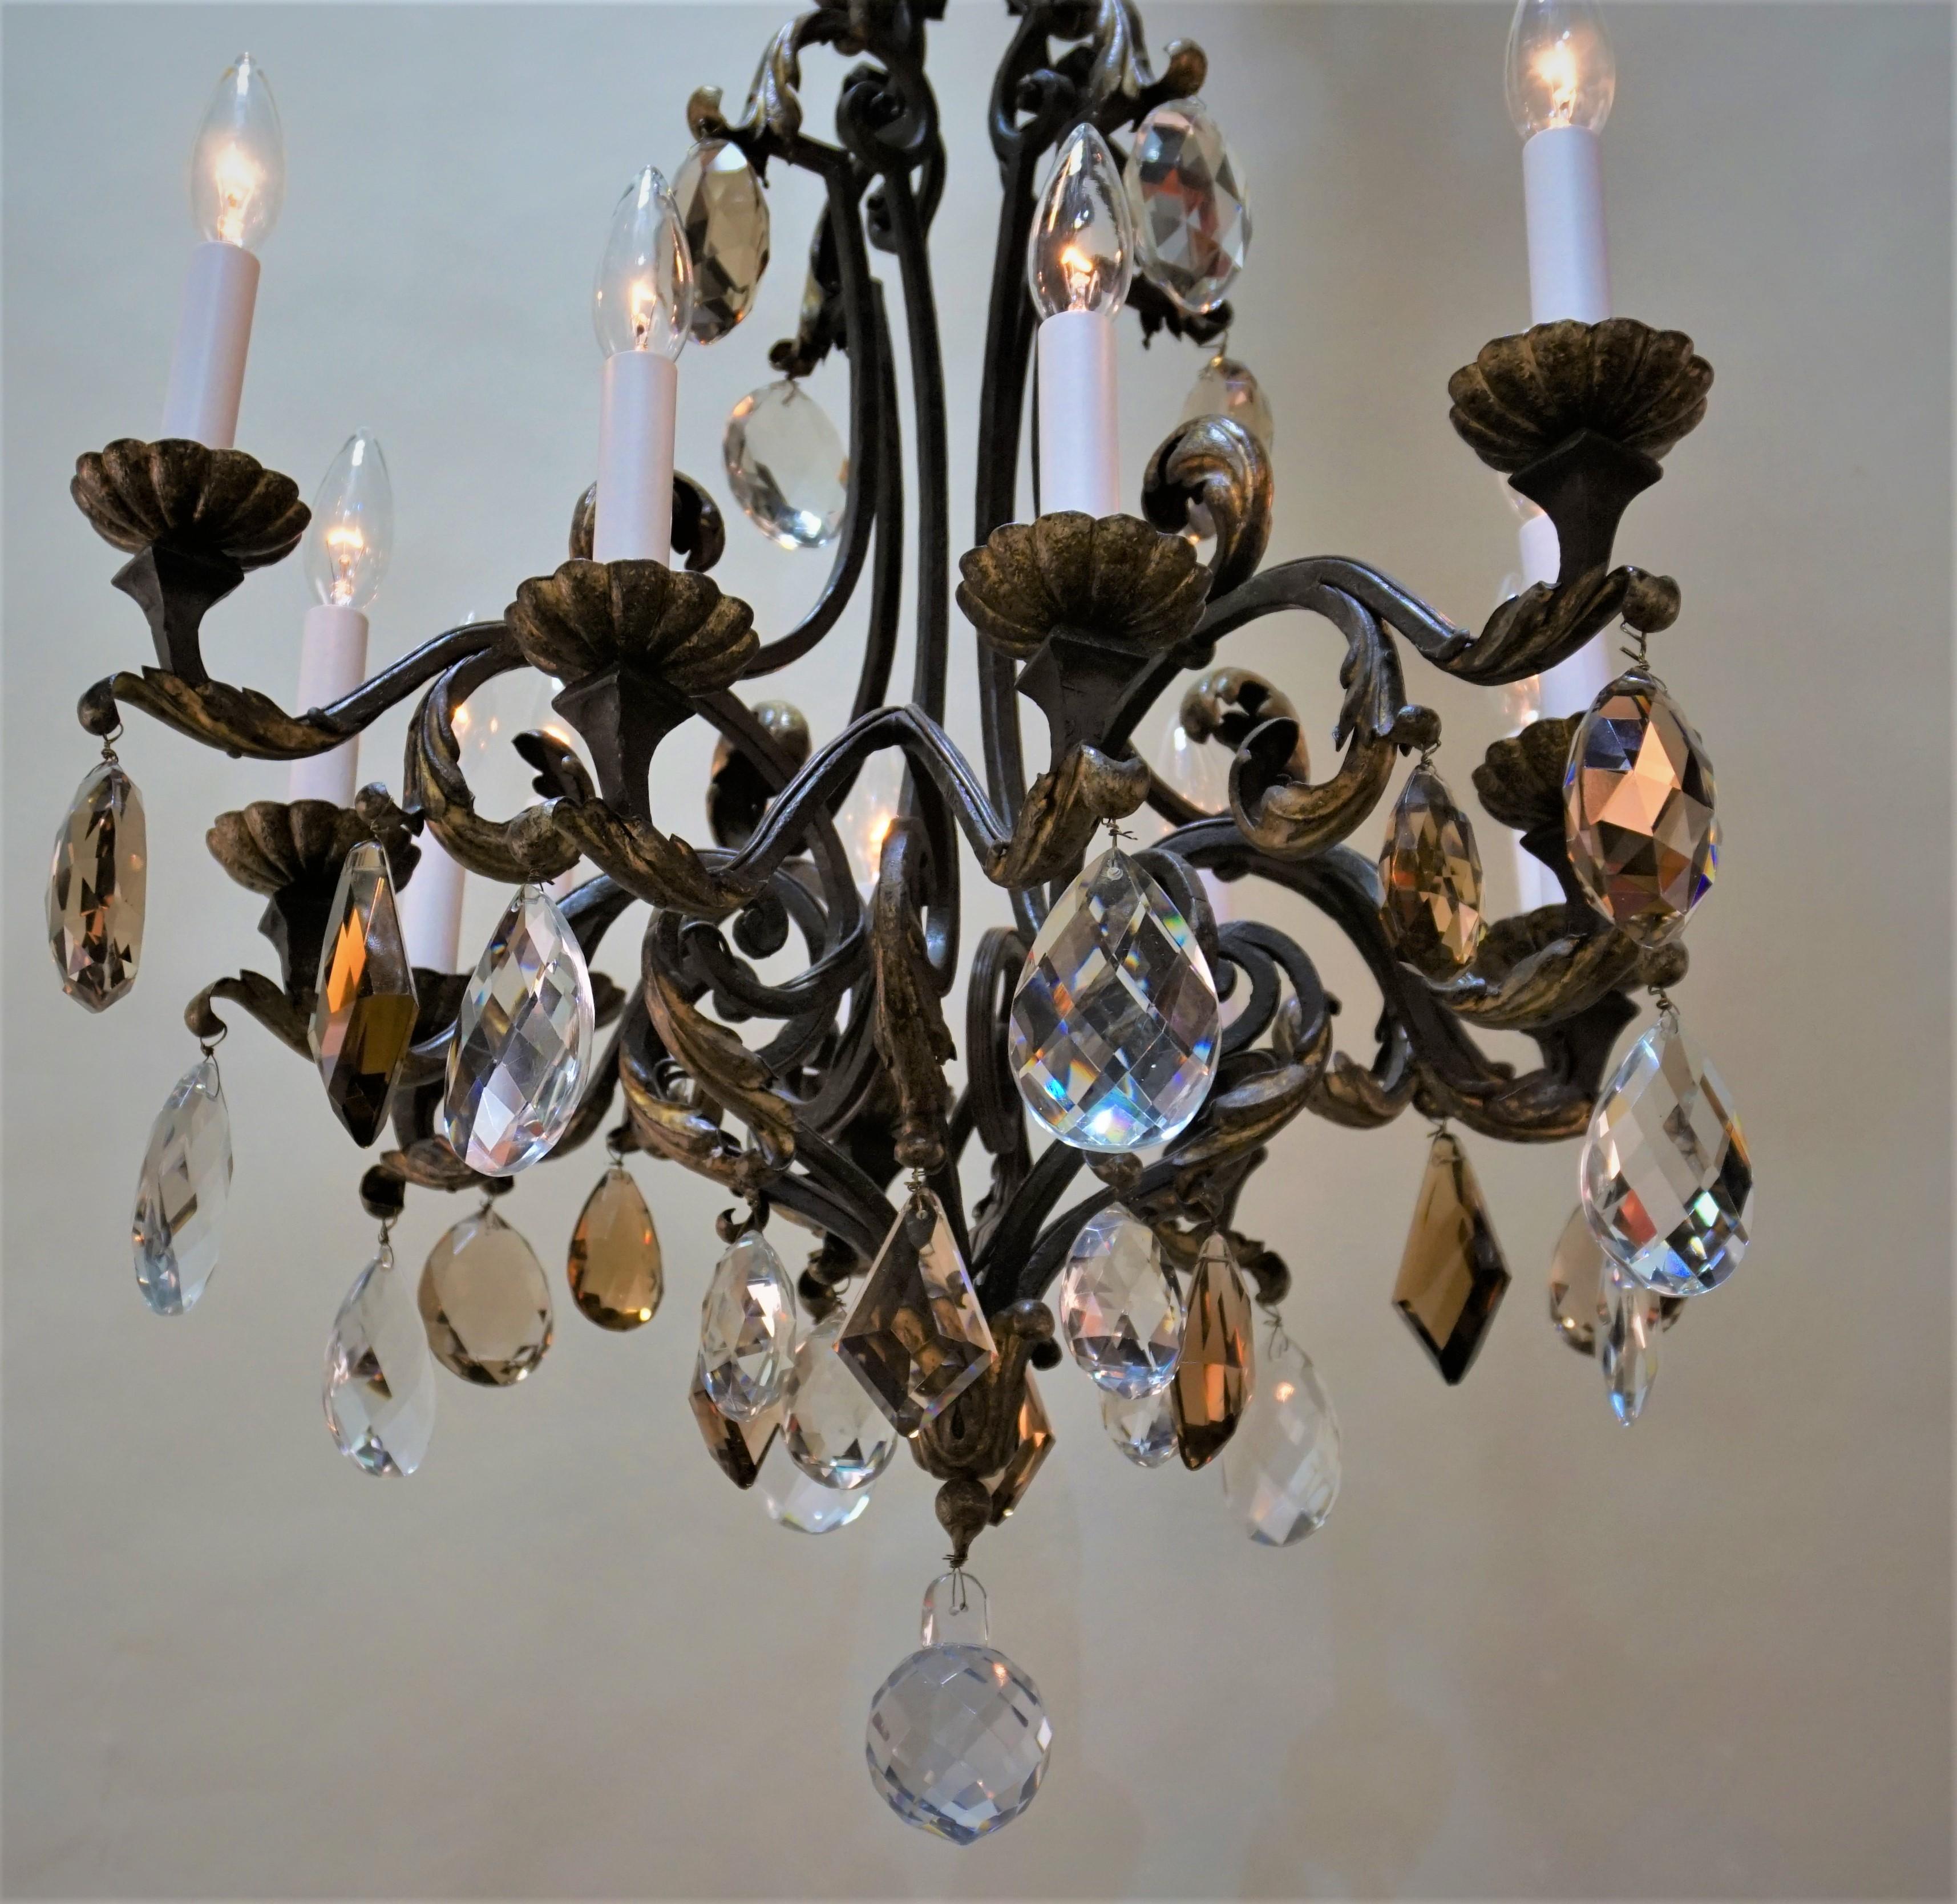 Elegant French wrought iron with some gilt decoration and crystal chandelier.
Measures: Total height is 55'with all the chain, minimum height fully installed 36